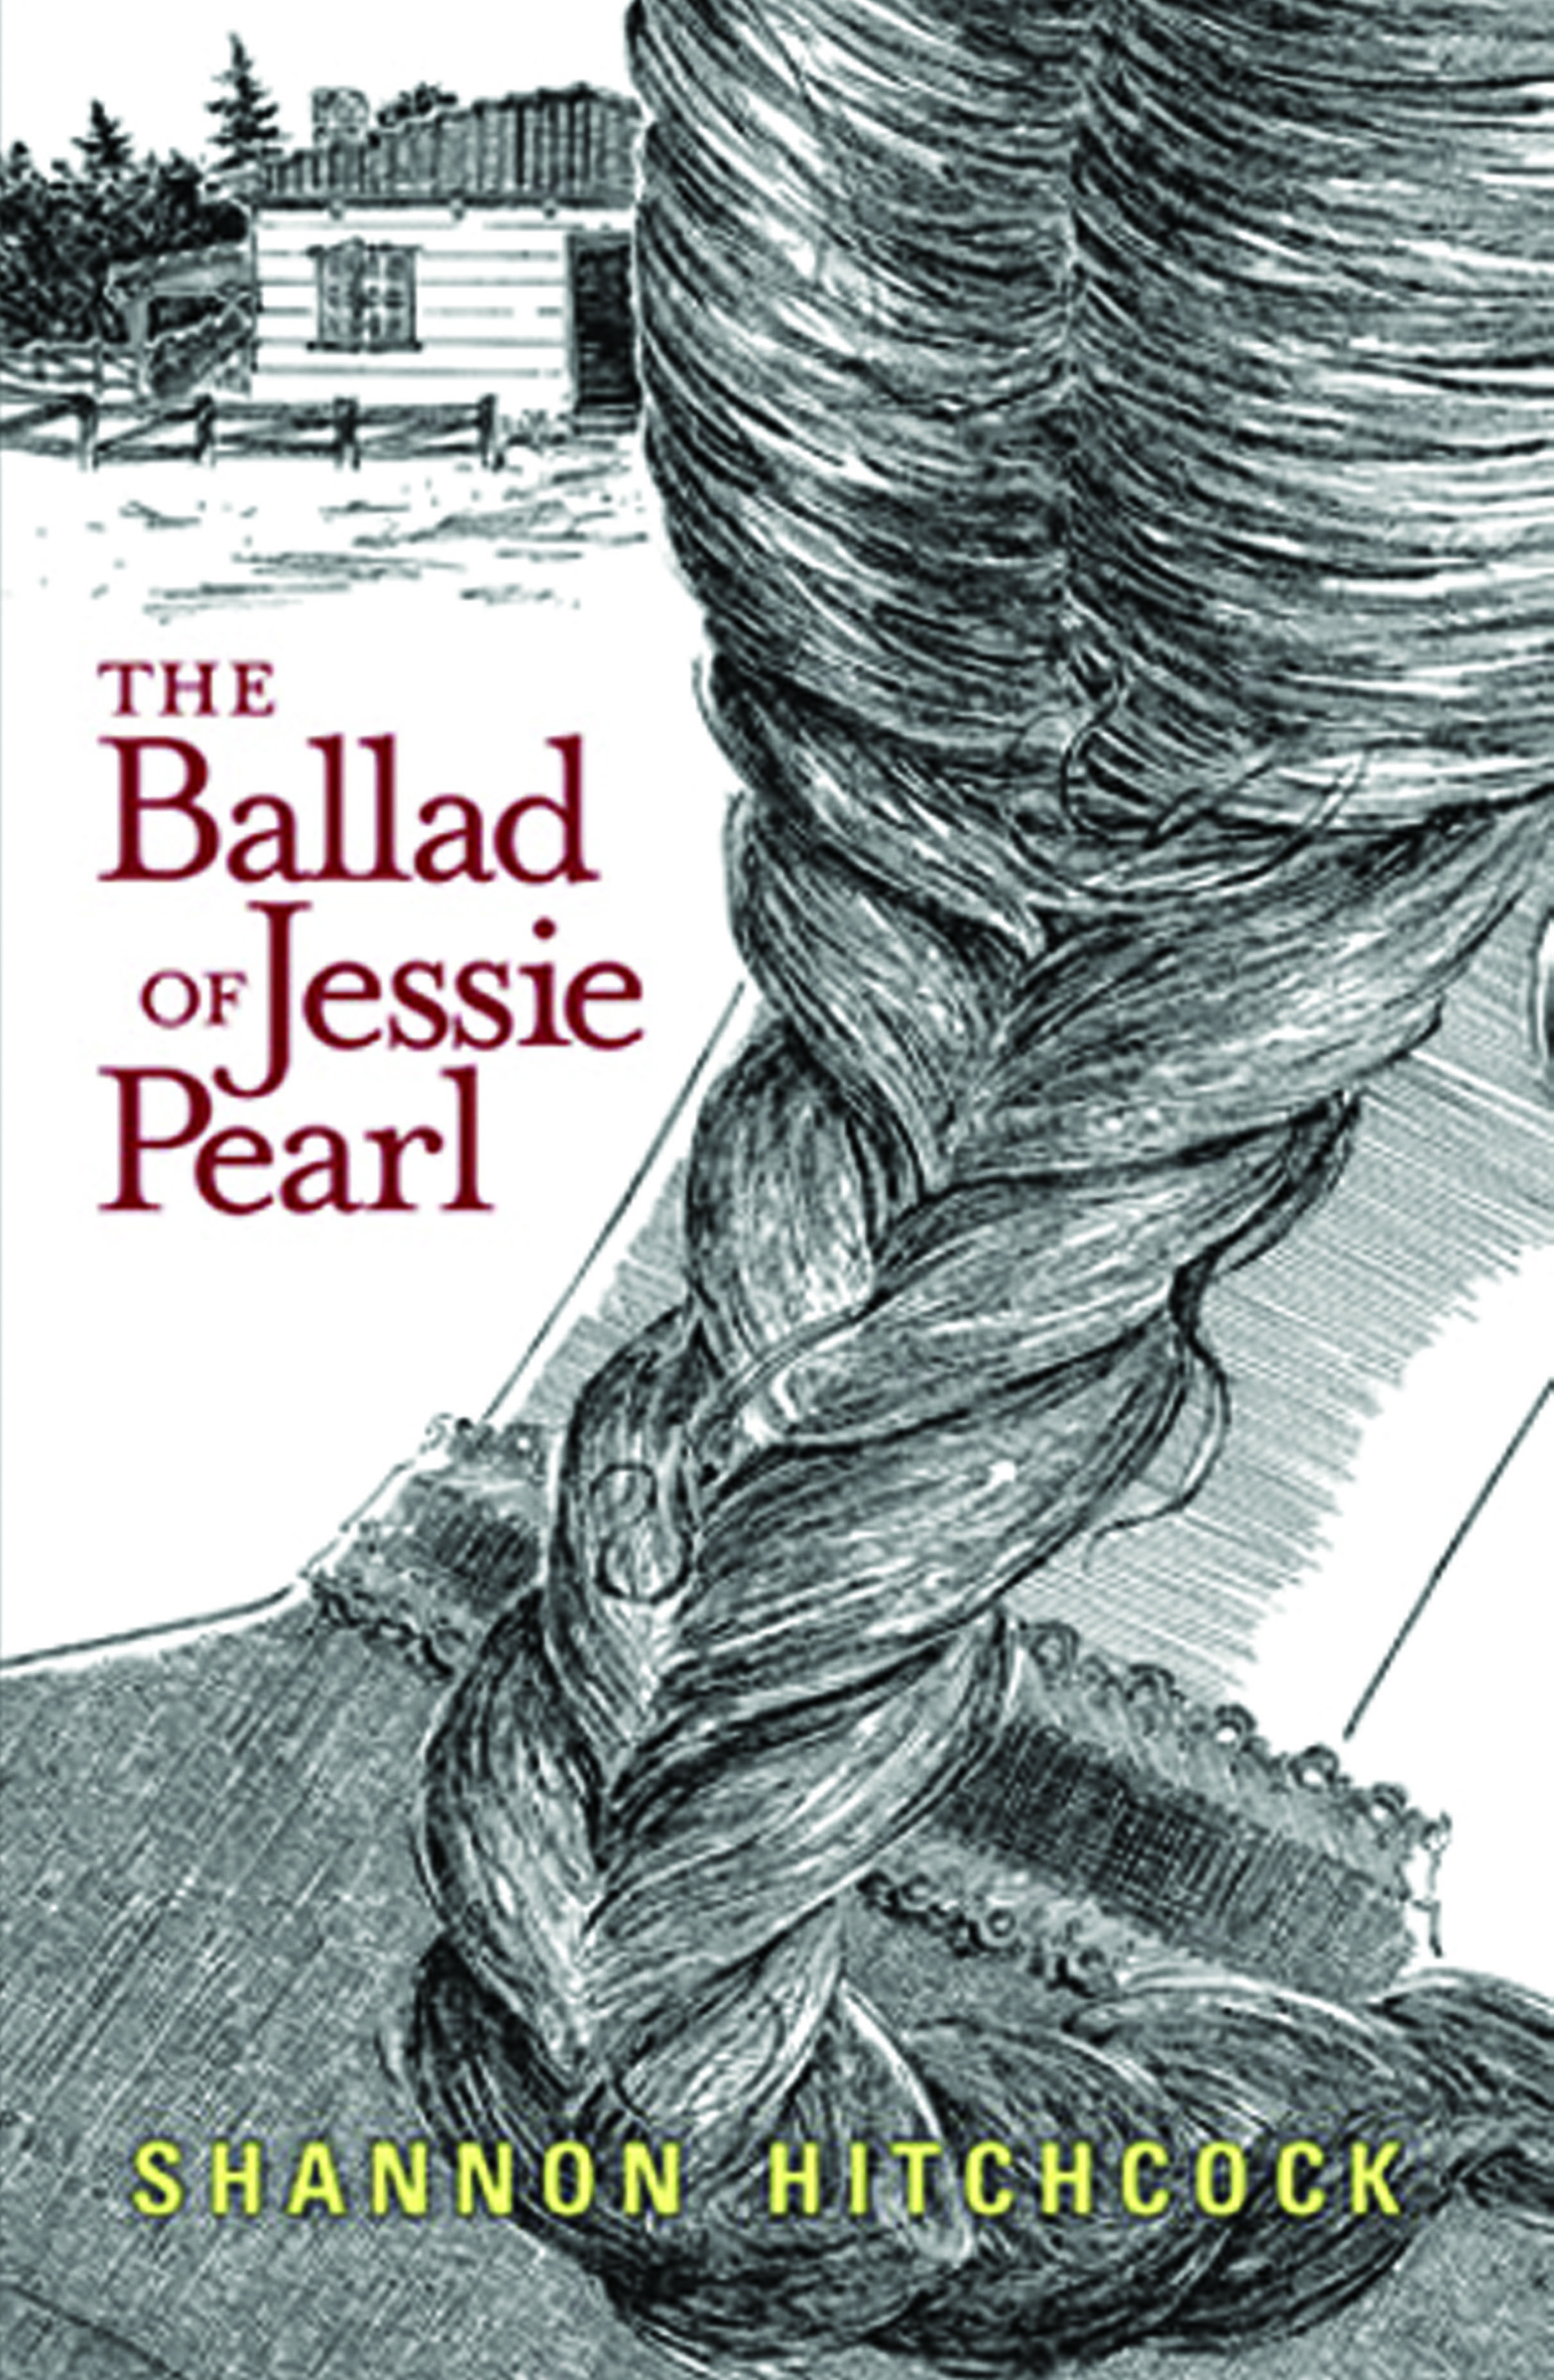 The Ballad of Jesse Pearl by Shannon Hitchcock